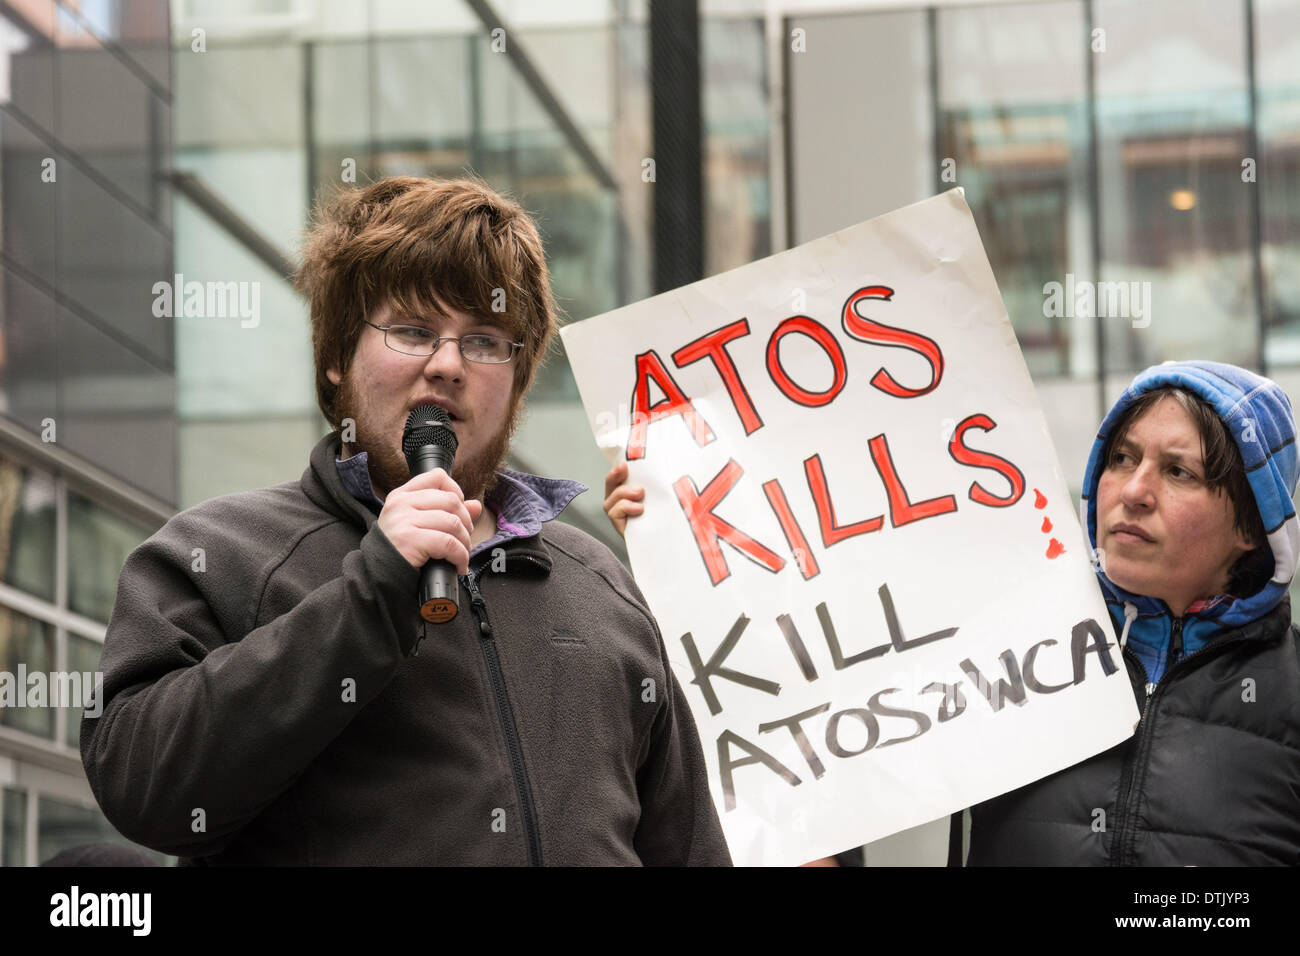 ATOS headquarters, London, UK, 19th February, 2014. A protester speaks as people gather outside ATOS head office in London to protest the company’s implementation of Work Capability Assessments. Protesters say that ATOS workers with little or no medical knowledge make poor decisions which lead to people losing their sickness benefits, and demand that a qualified medical doctor, ideally the GP who regularly sees and treats the sick or disabled person in question, is the only person able to decide if an individual is fit for work. Credit:  Patricia Phillips/Alamy Live News Stock Photo